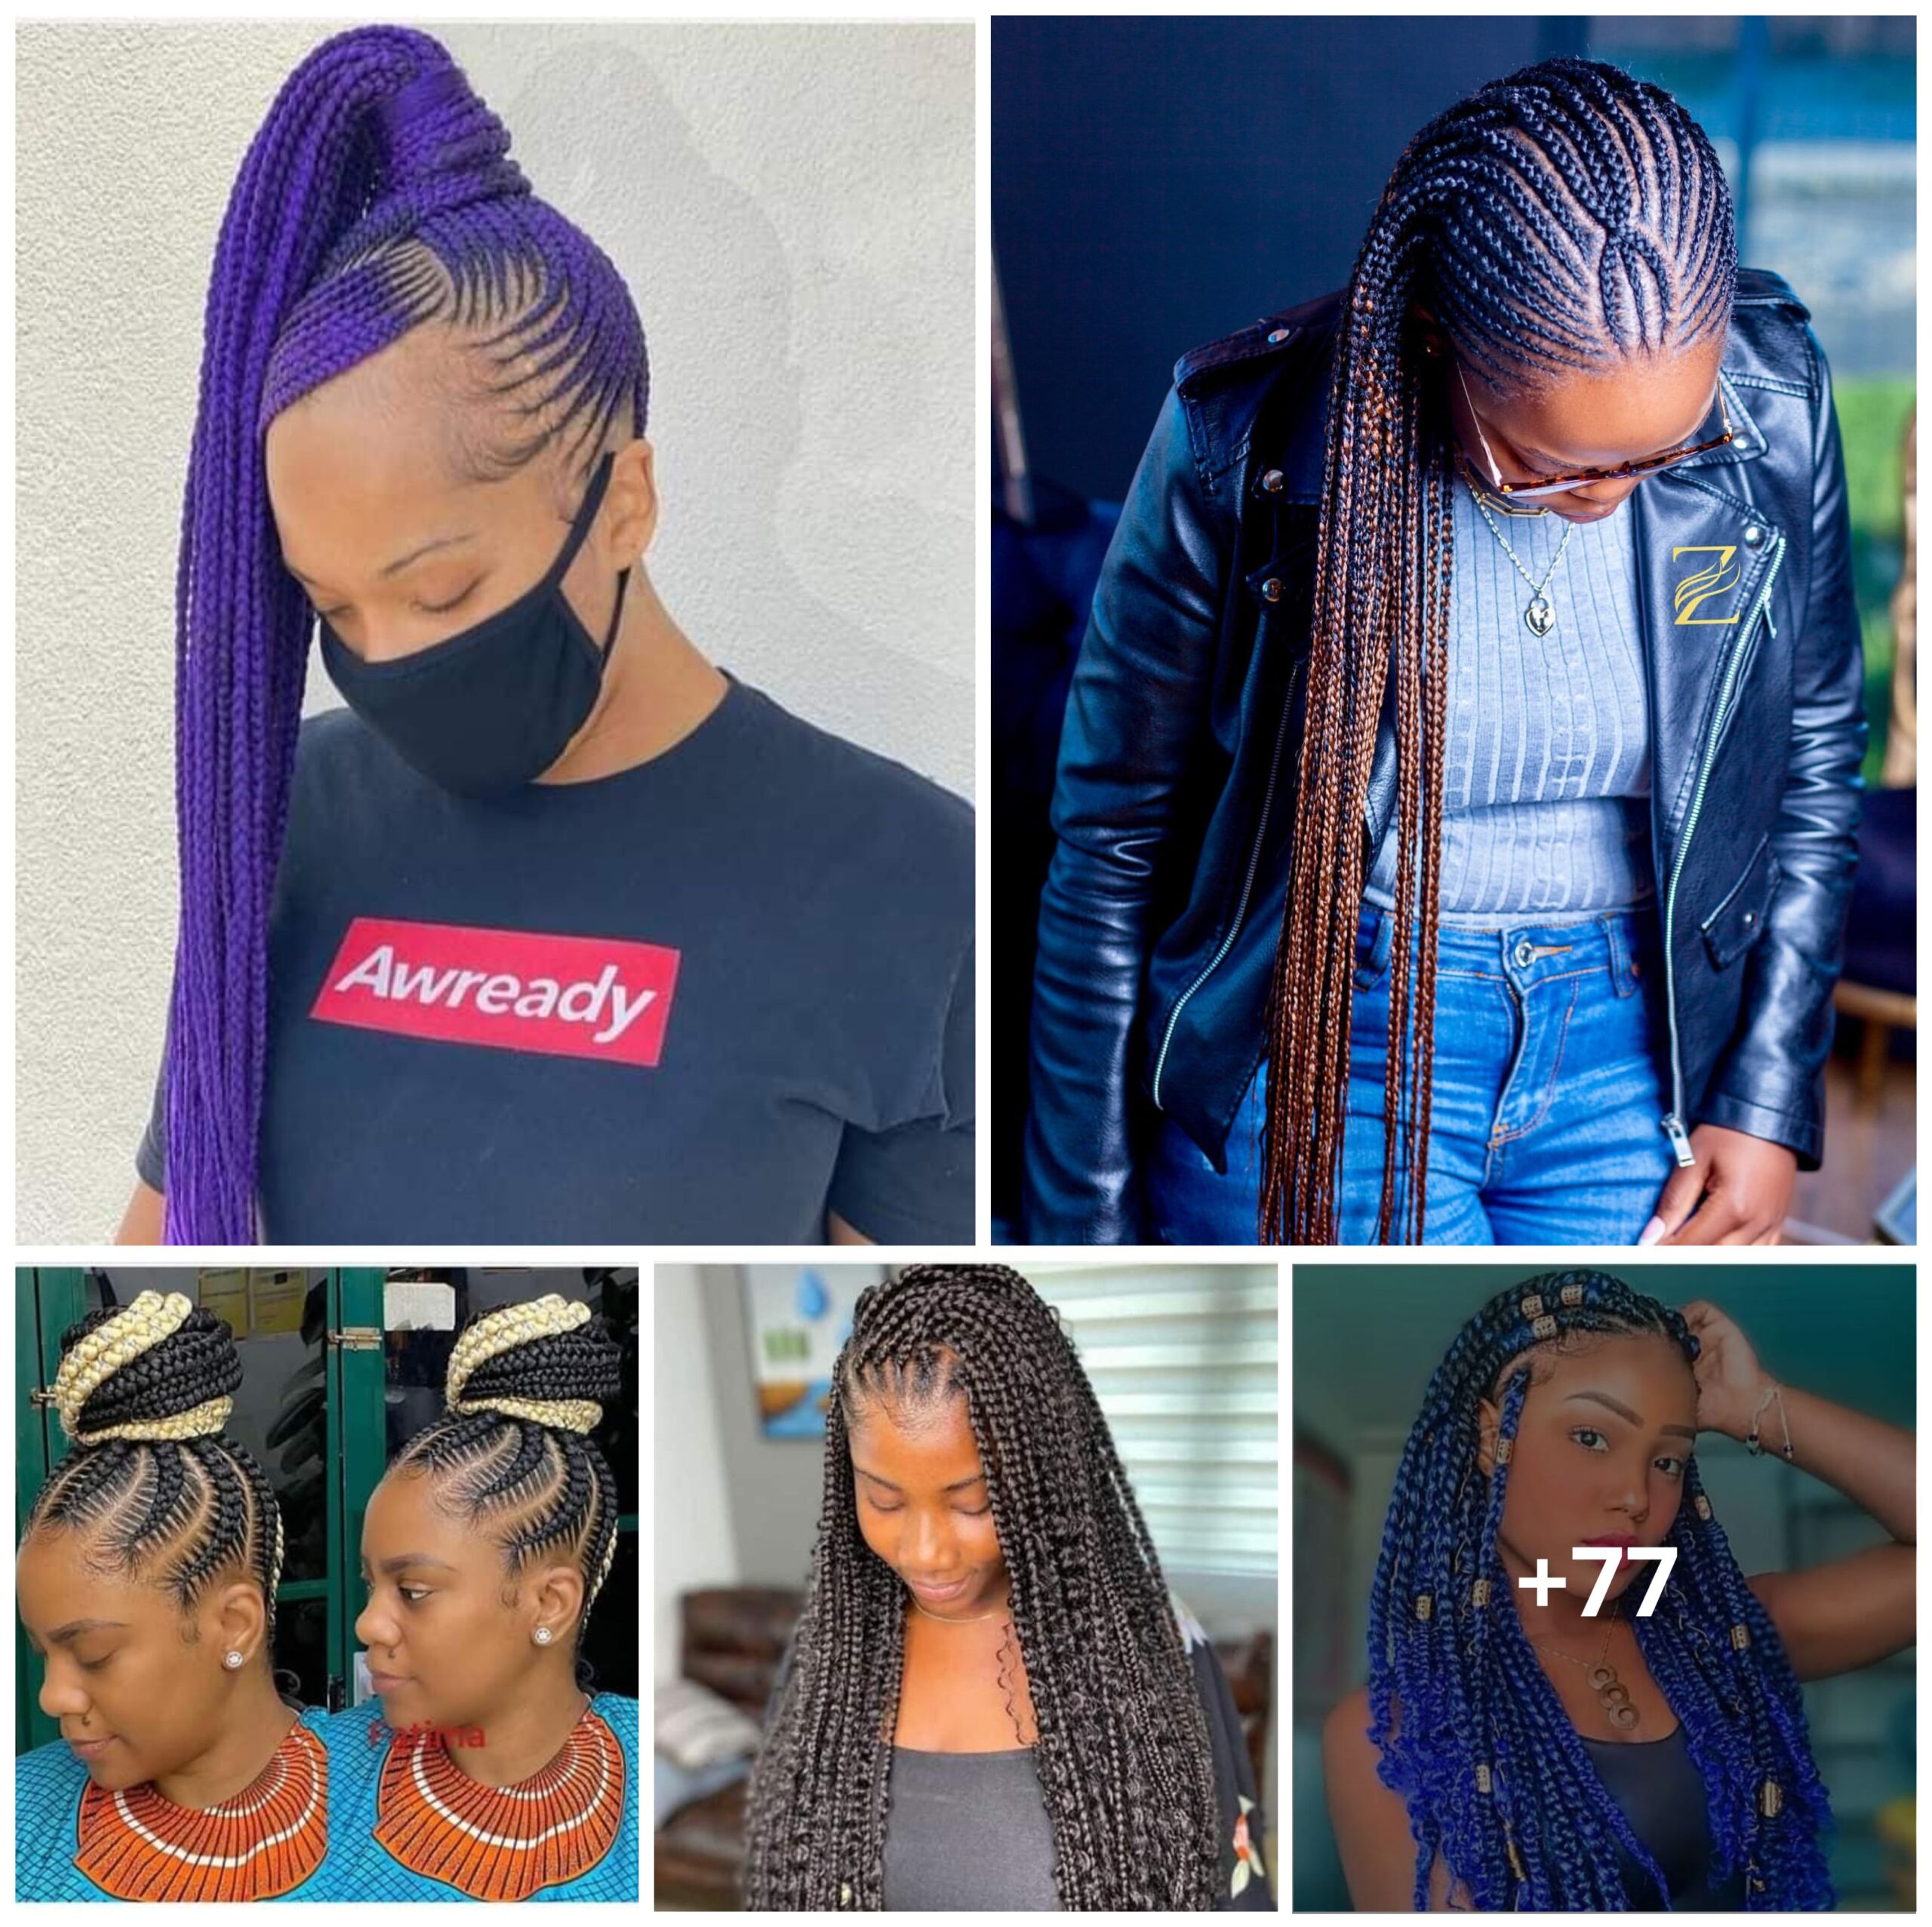 77 Ghana Braided Hairstyles with Different Designs